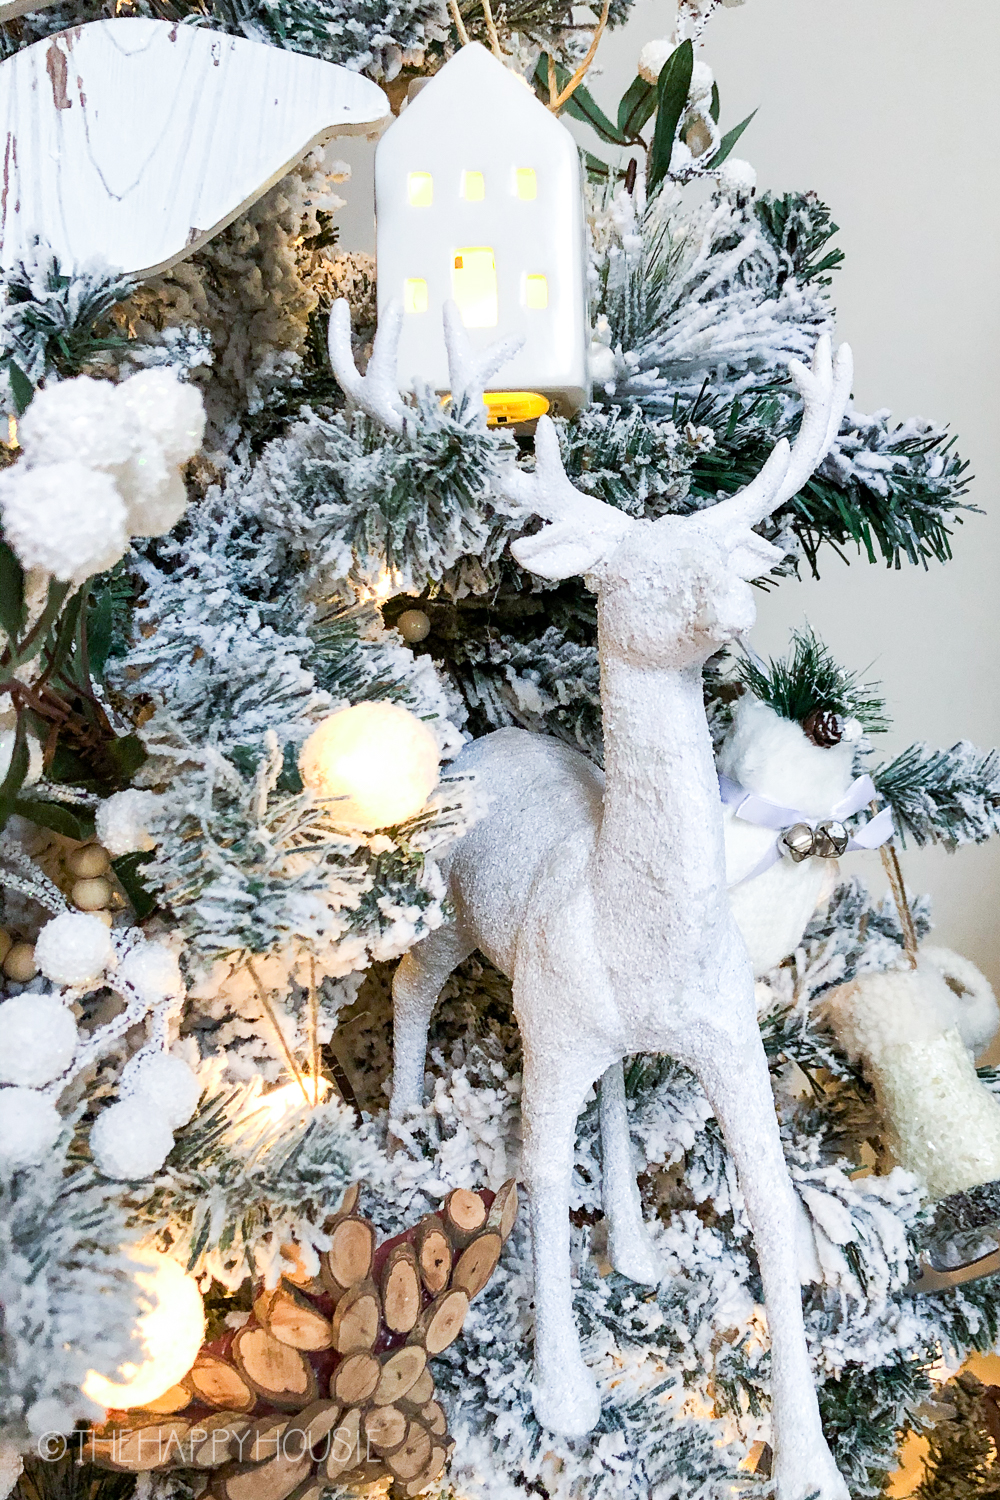 A white sparkly deer is set onto the branches of the tree.